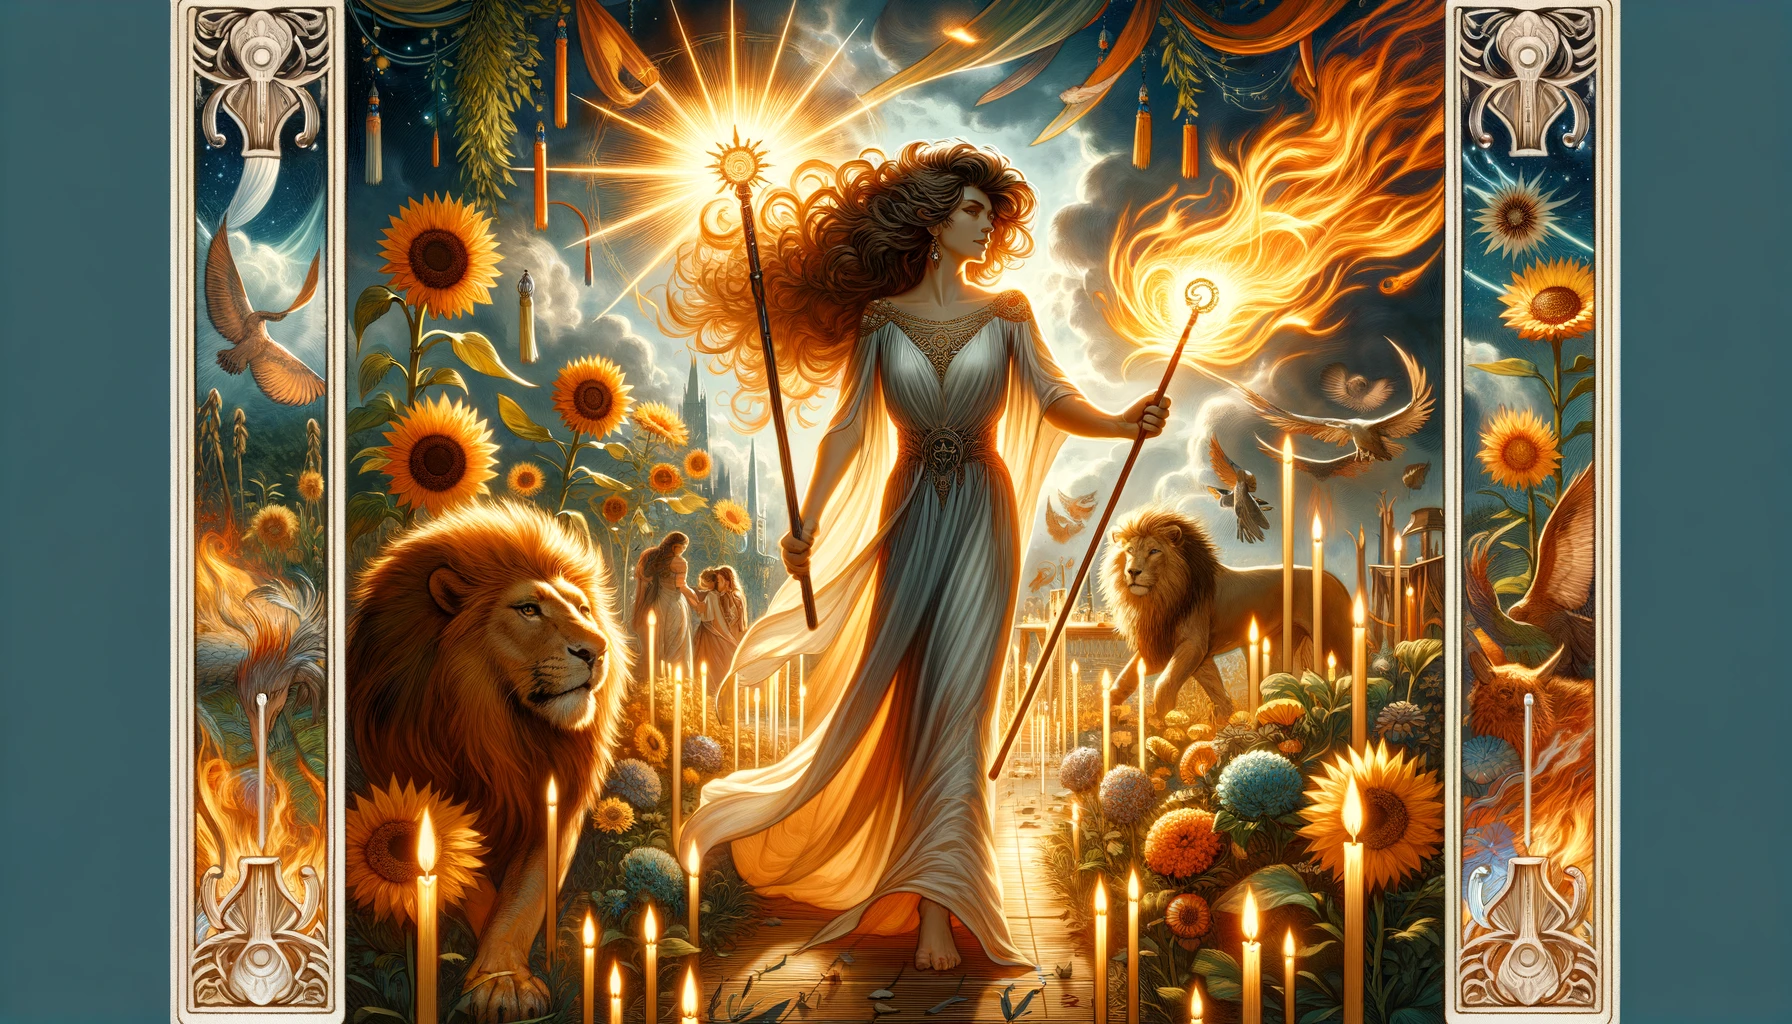 An illustration featuring the Queen of Wands confidently leading amidst a lively and dynamic environment, symbolizing her transformative power, leadership, and self-belief that lead to success and achievement.